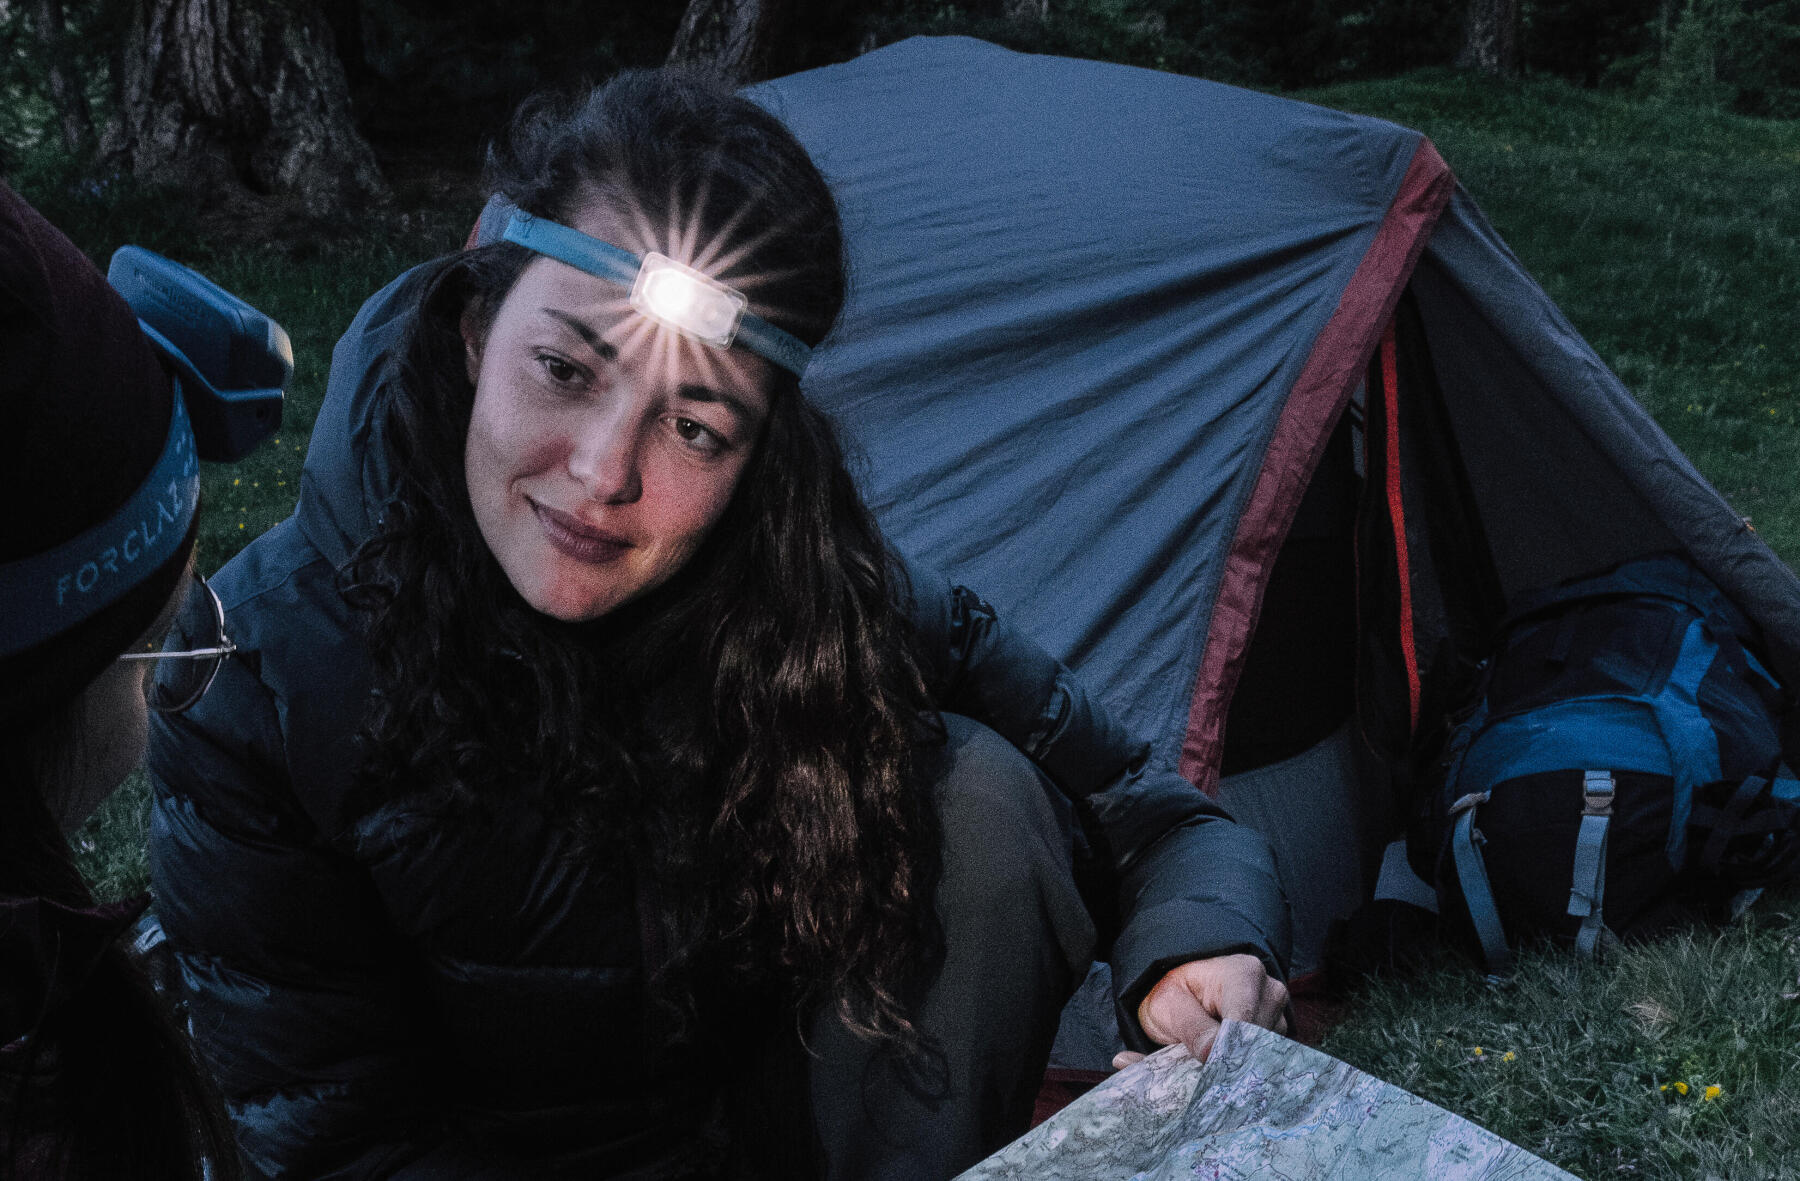 Woman camping and wearing a headlamp